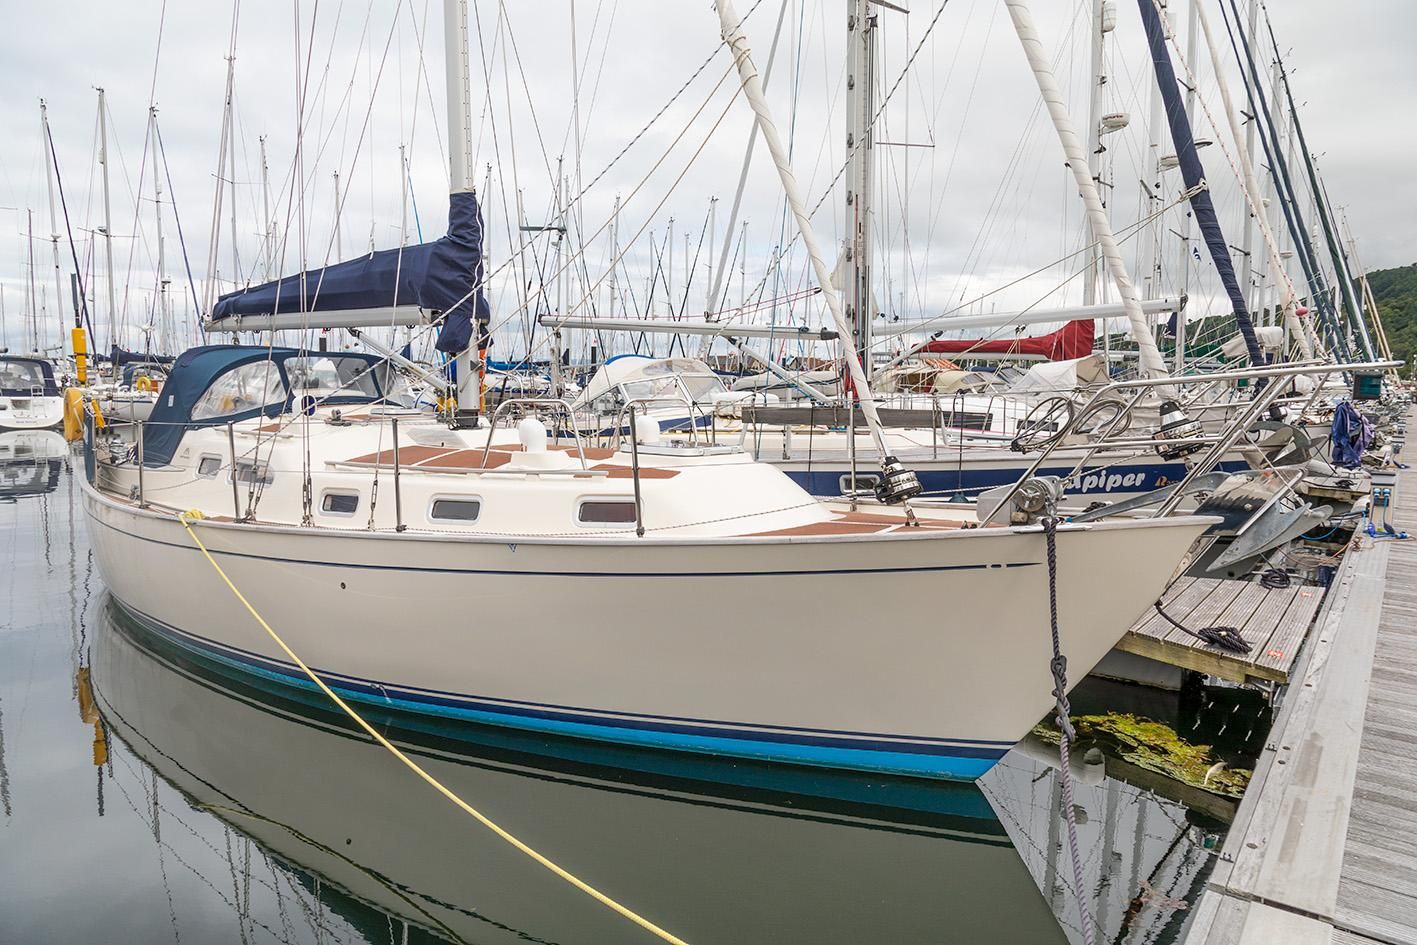 sailboats for sale in vancouver area